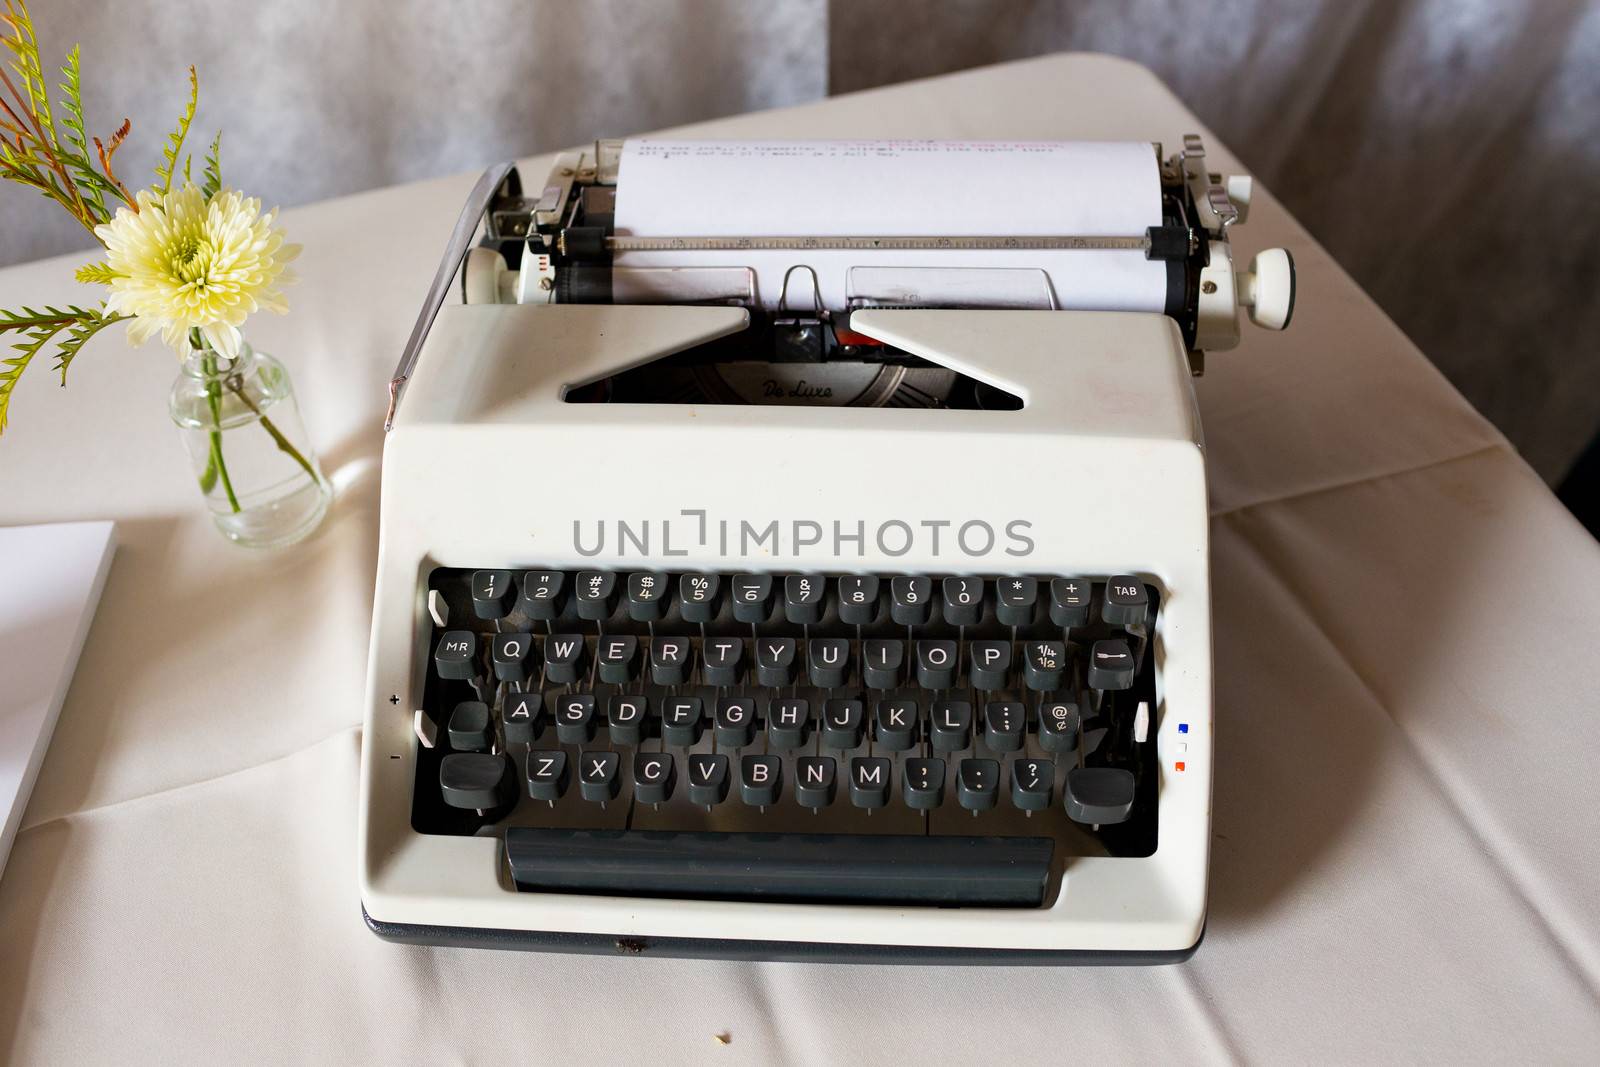 An antique typewriter is used as a guestbook at this wedding ceremony and reception.